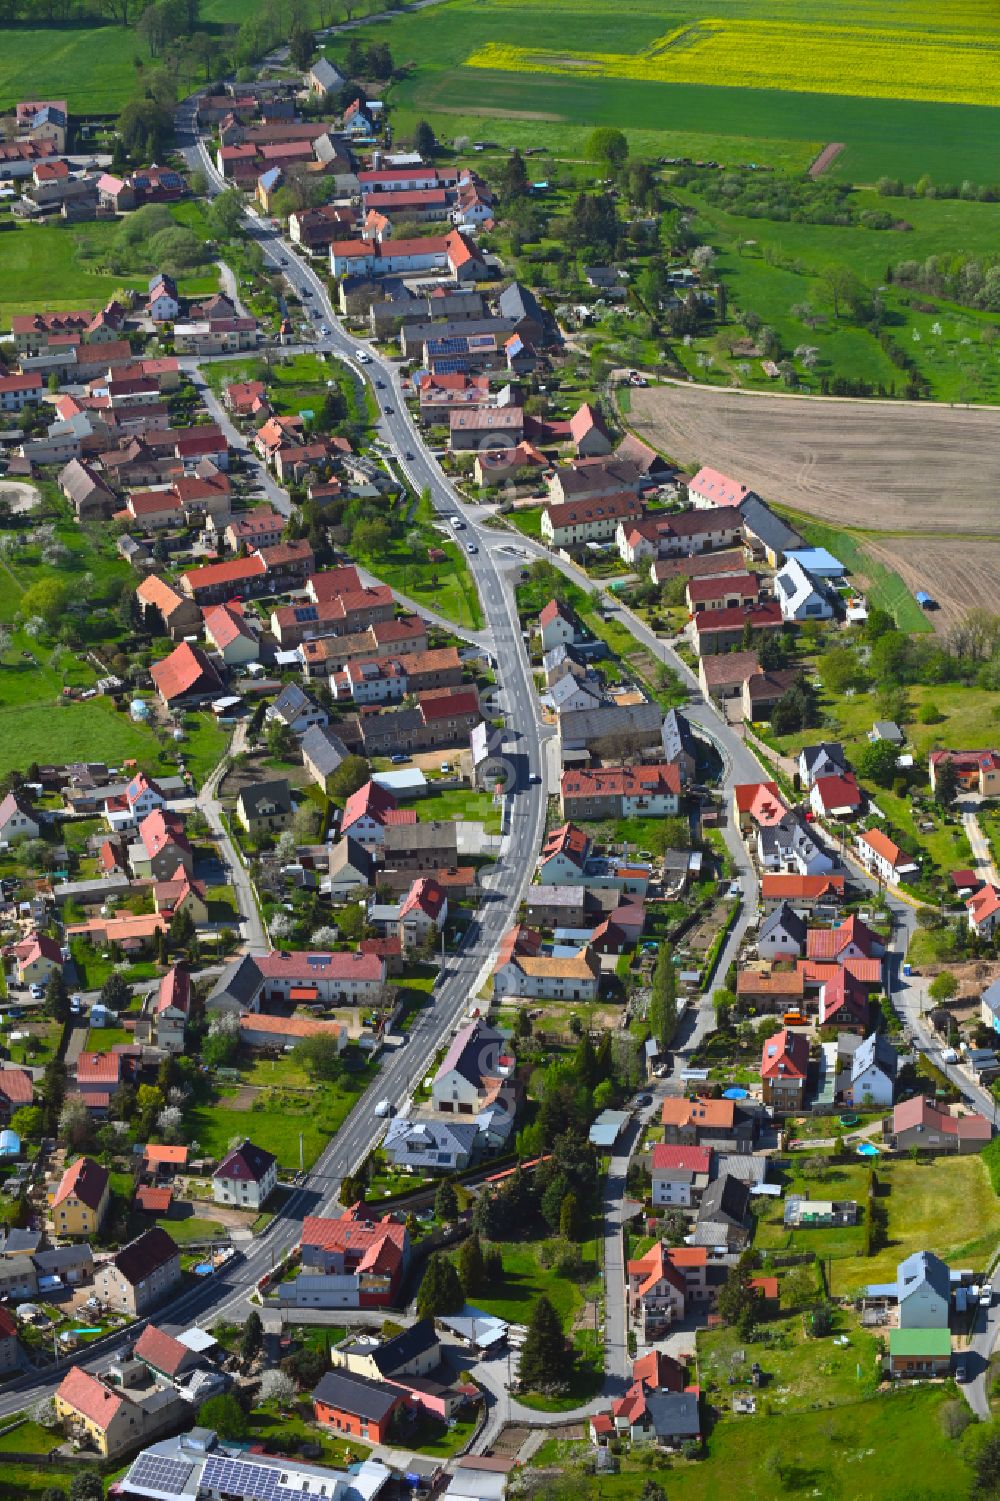 Kurort Volkersdorf from above - Town View of the streets and houses of the residential areas in Kurort Volkersdorf in the state Saxony, Germany